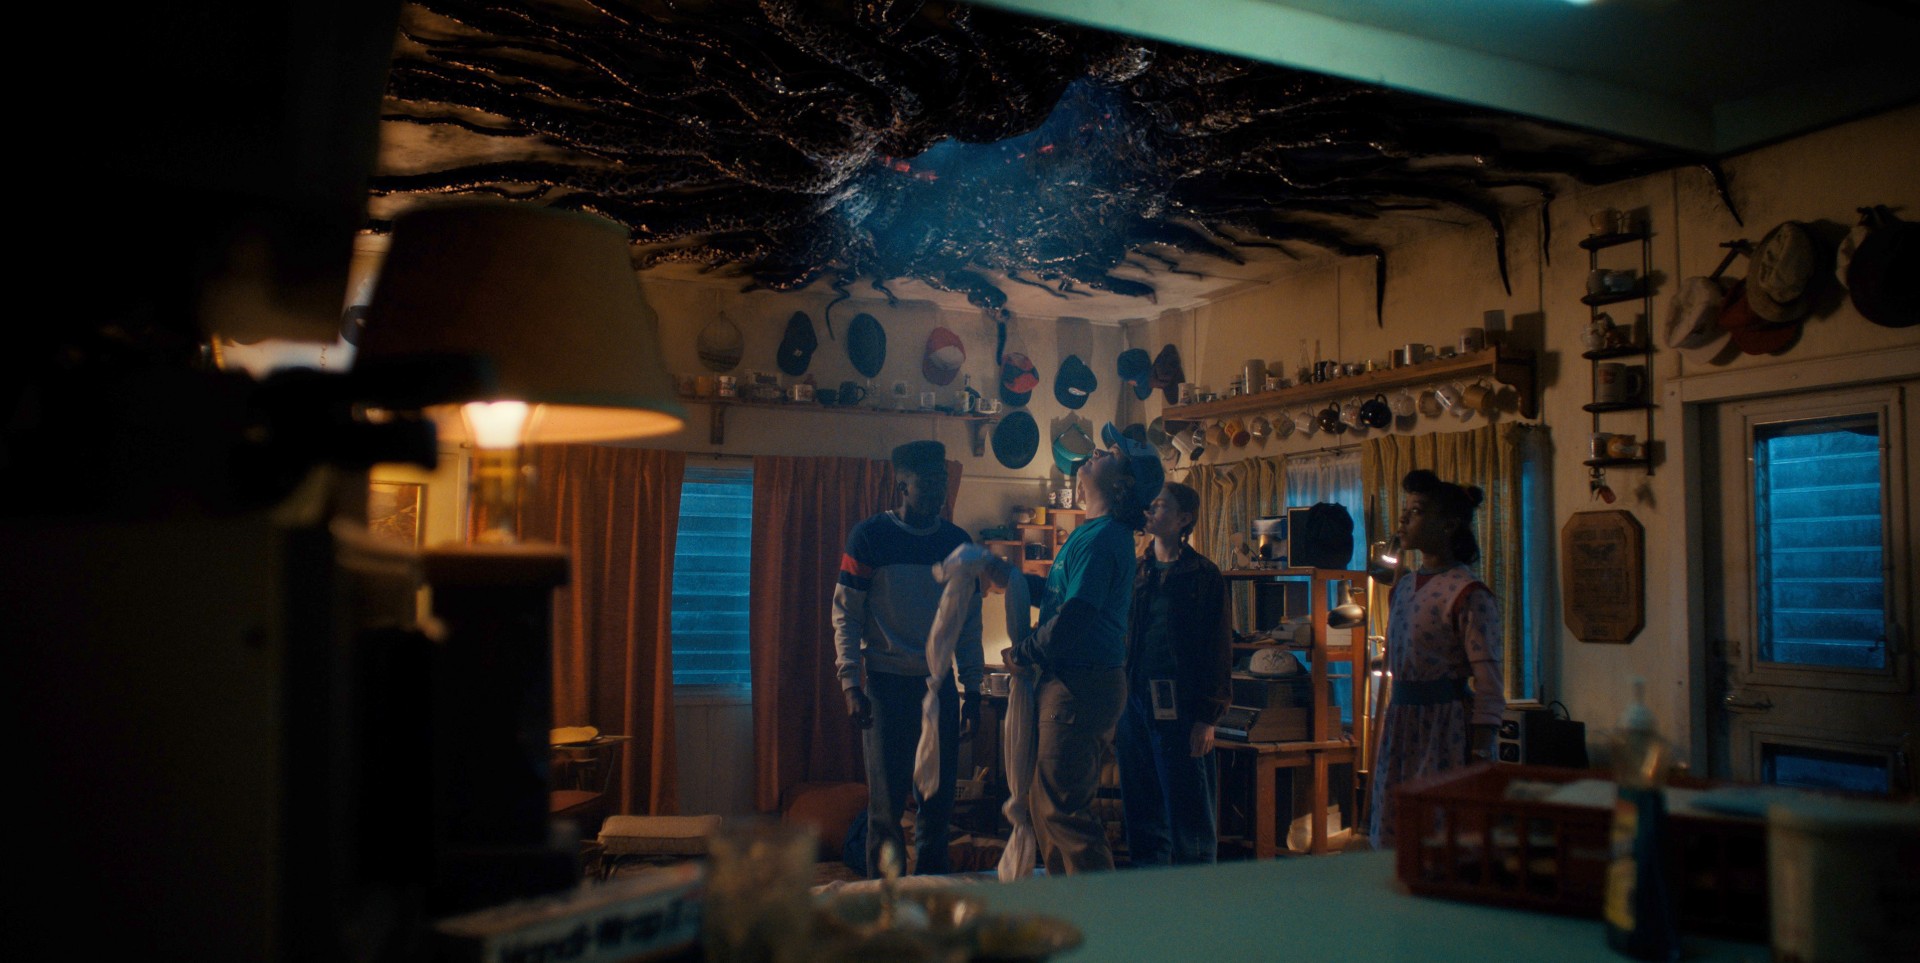 The characters in Stranger Things looks up at a portal in the ceiling of a room.